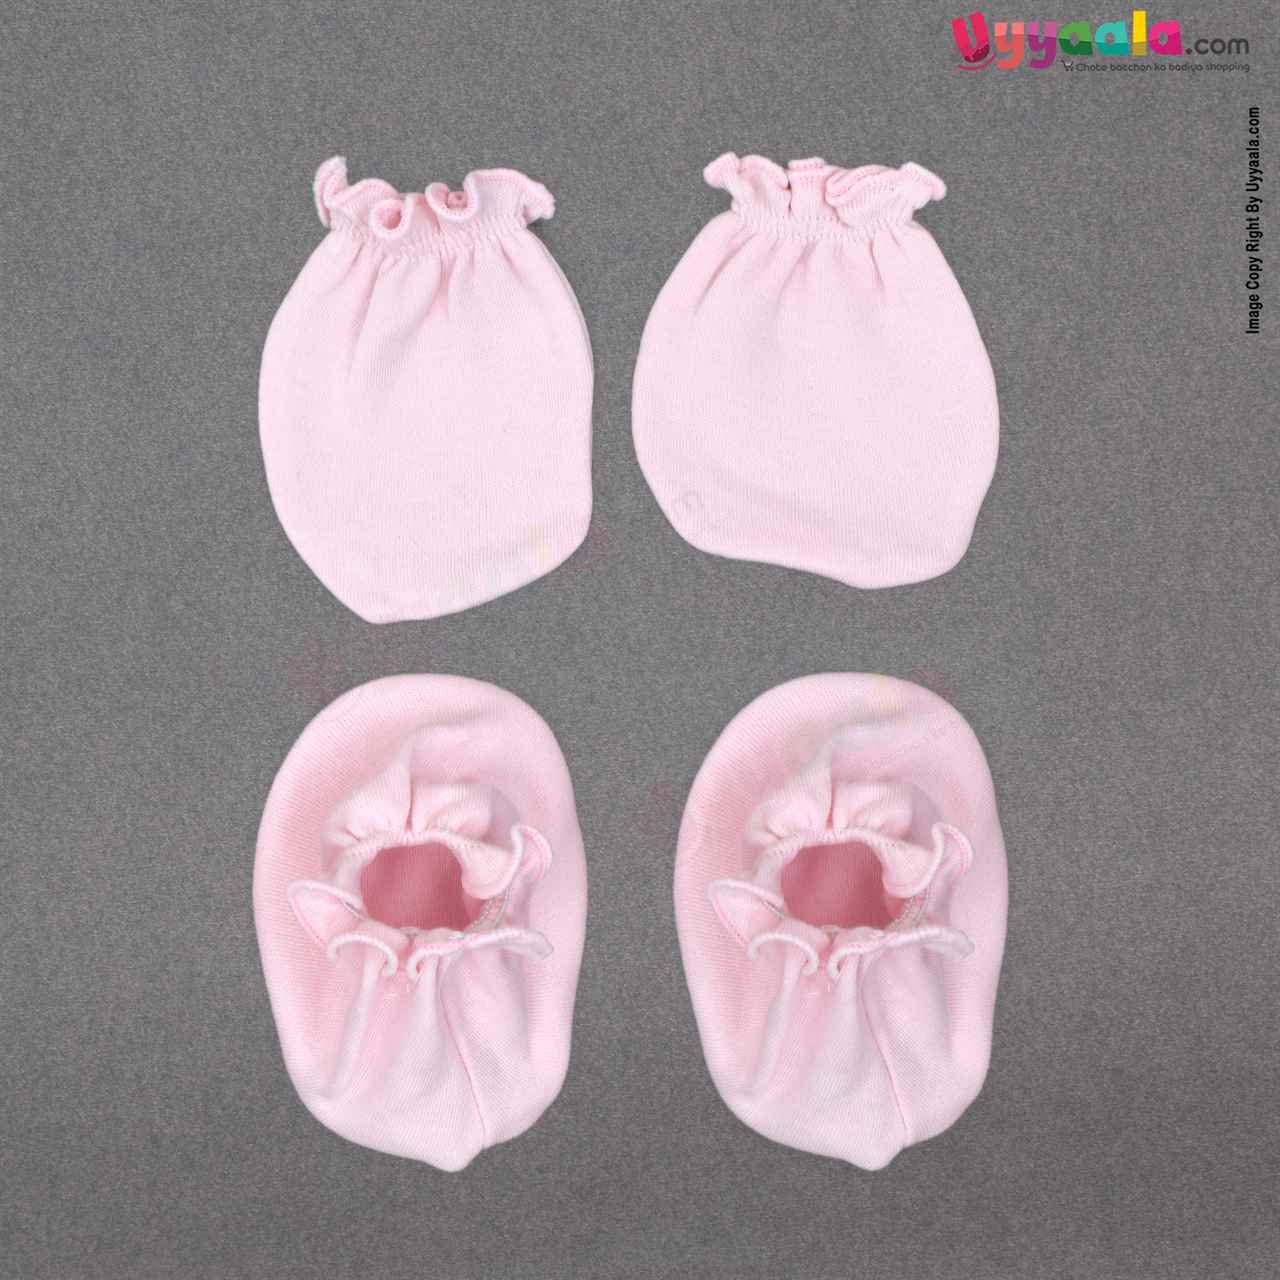 Mittens & Booties Set For Babies - Baby Pink 0-3m ,Pack of 4